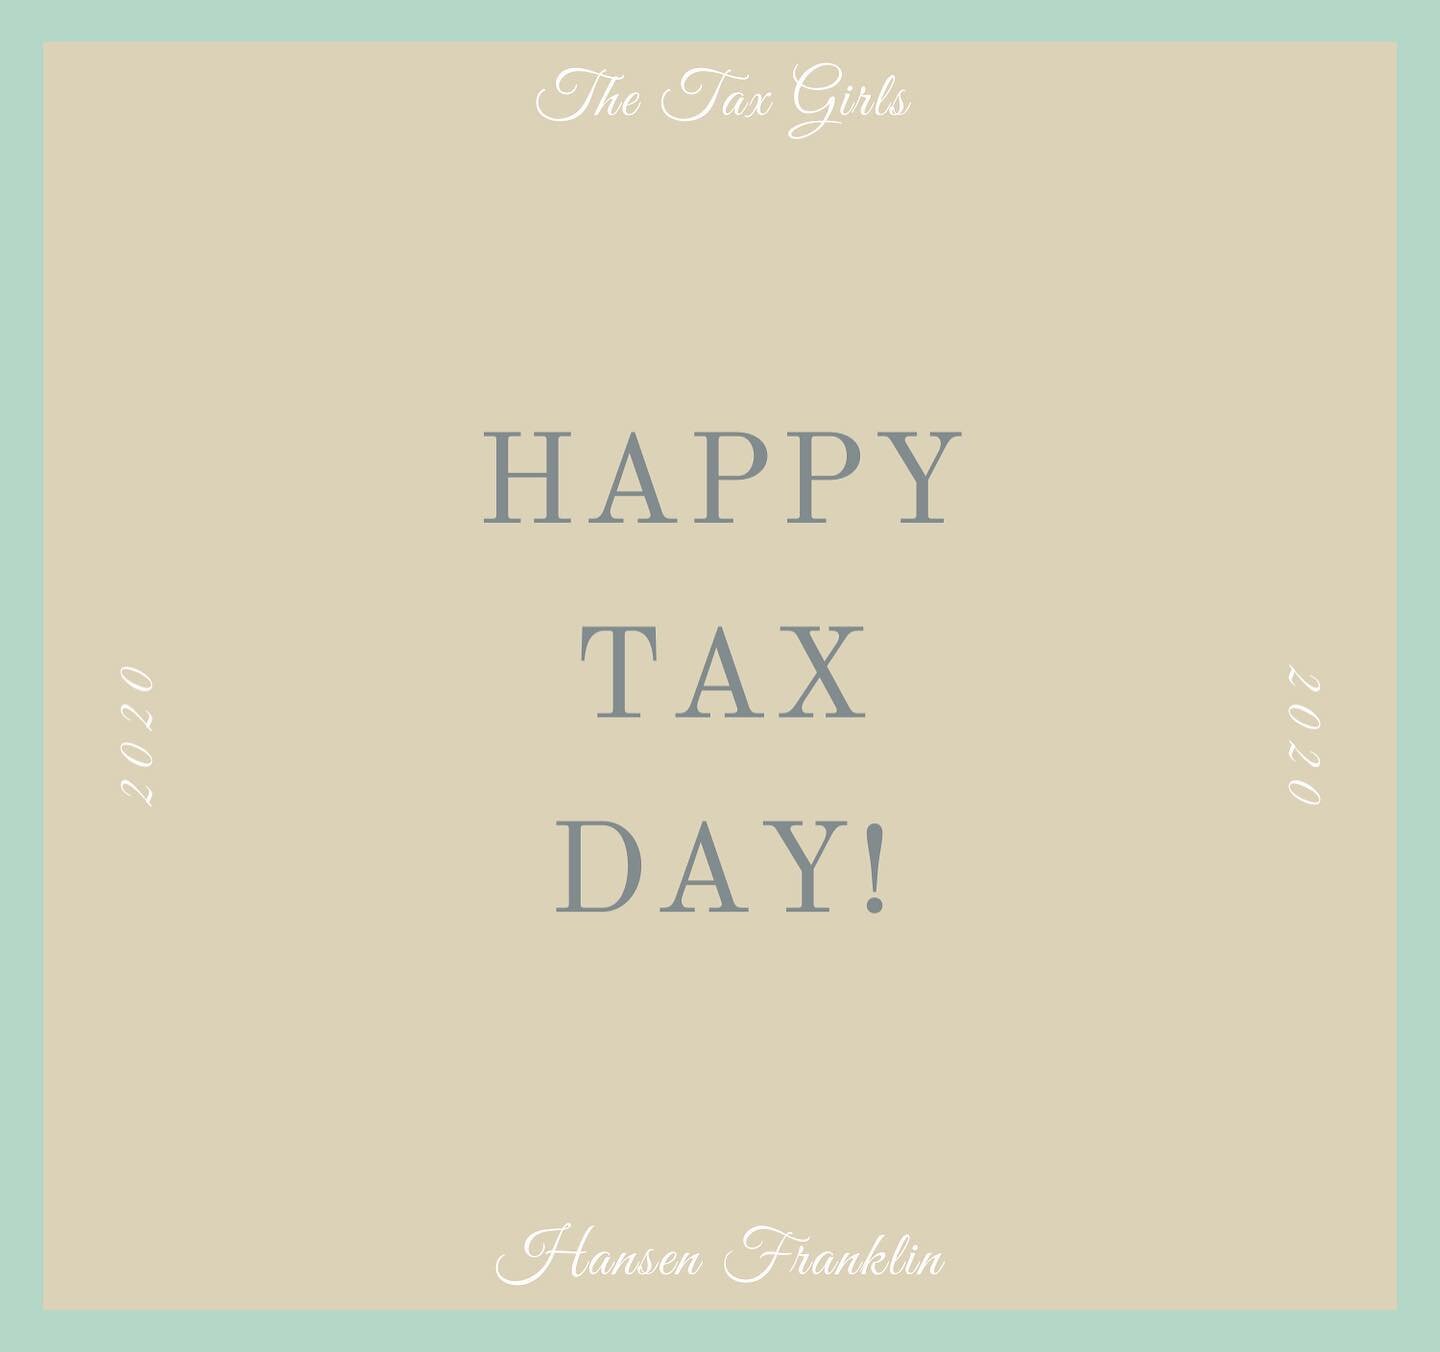 While we had an extra three months, today is officially the last day to file for individual tax returns. This year has been a wild ride for sure, but we&rsquo;re happy you trusted us and look forward to continuing to help you with all your accounting